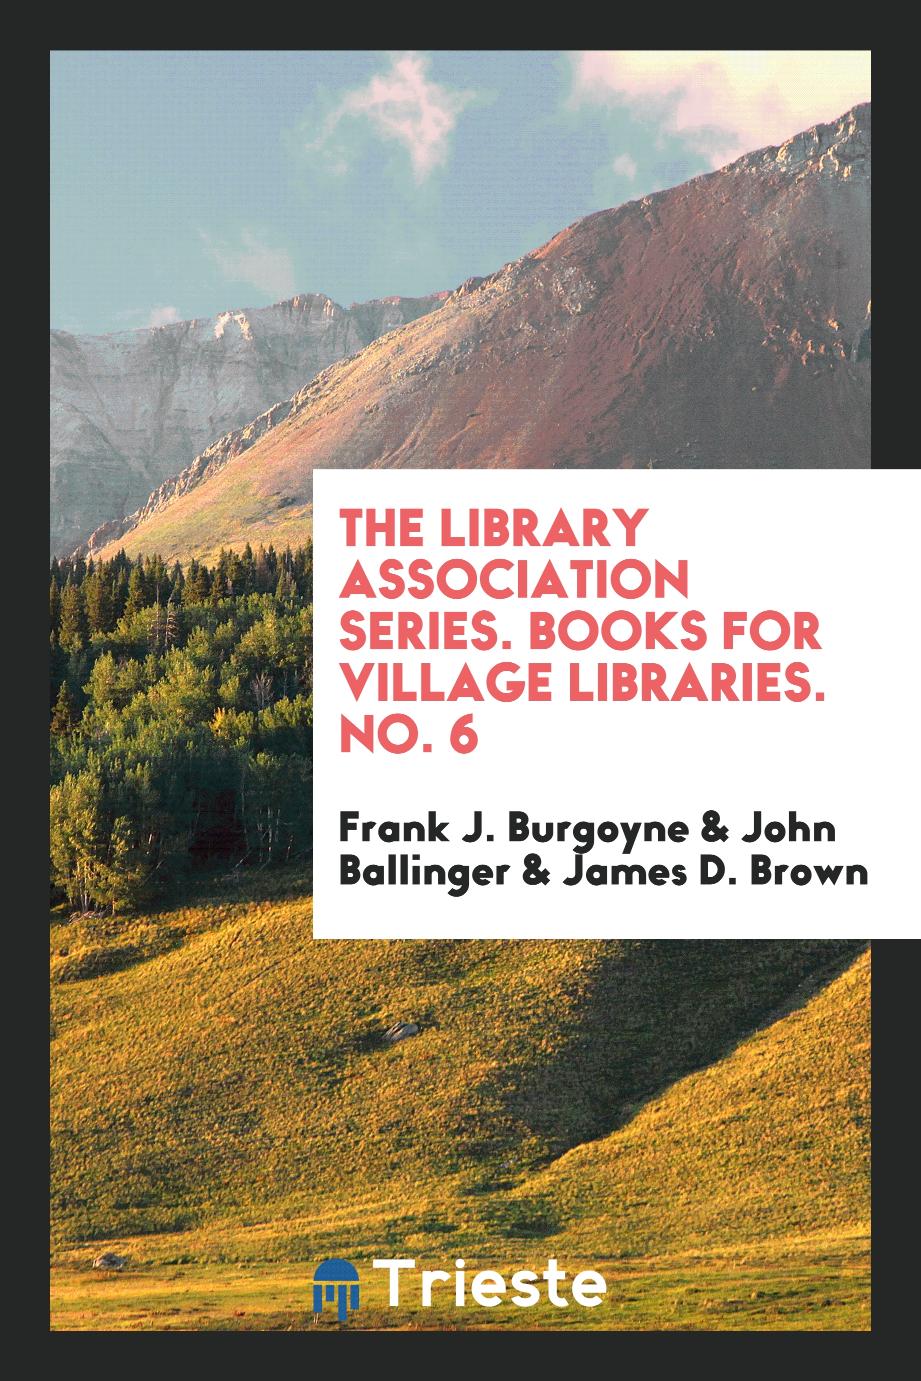 The library association series. Books for Village Libraries. No. 6